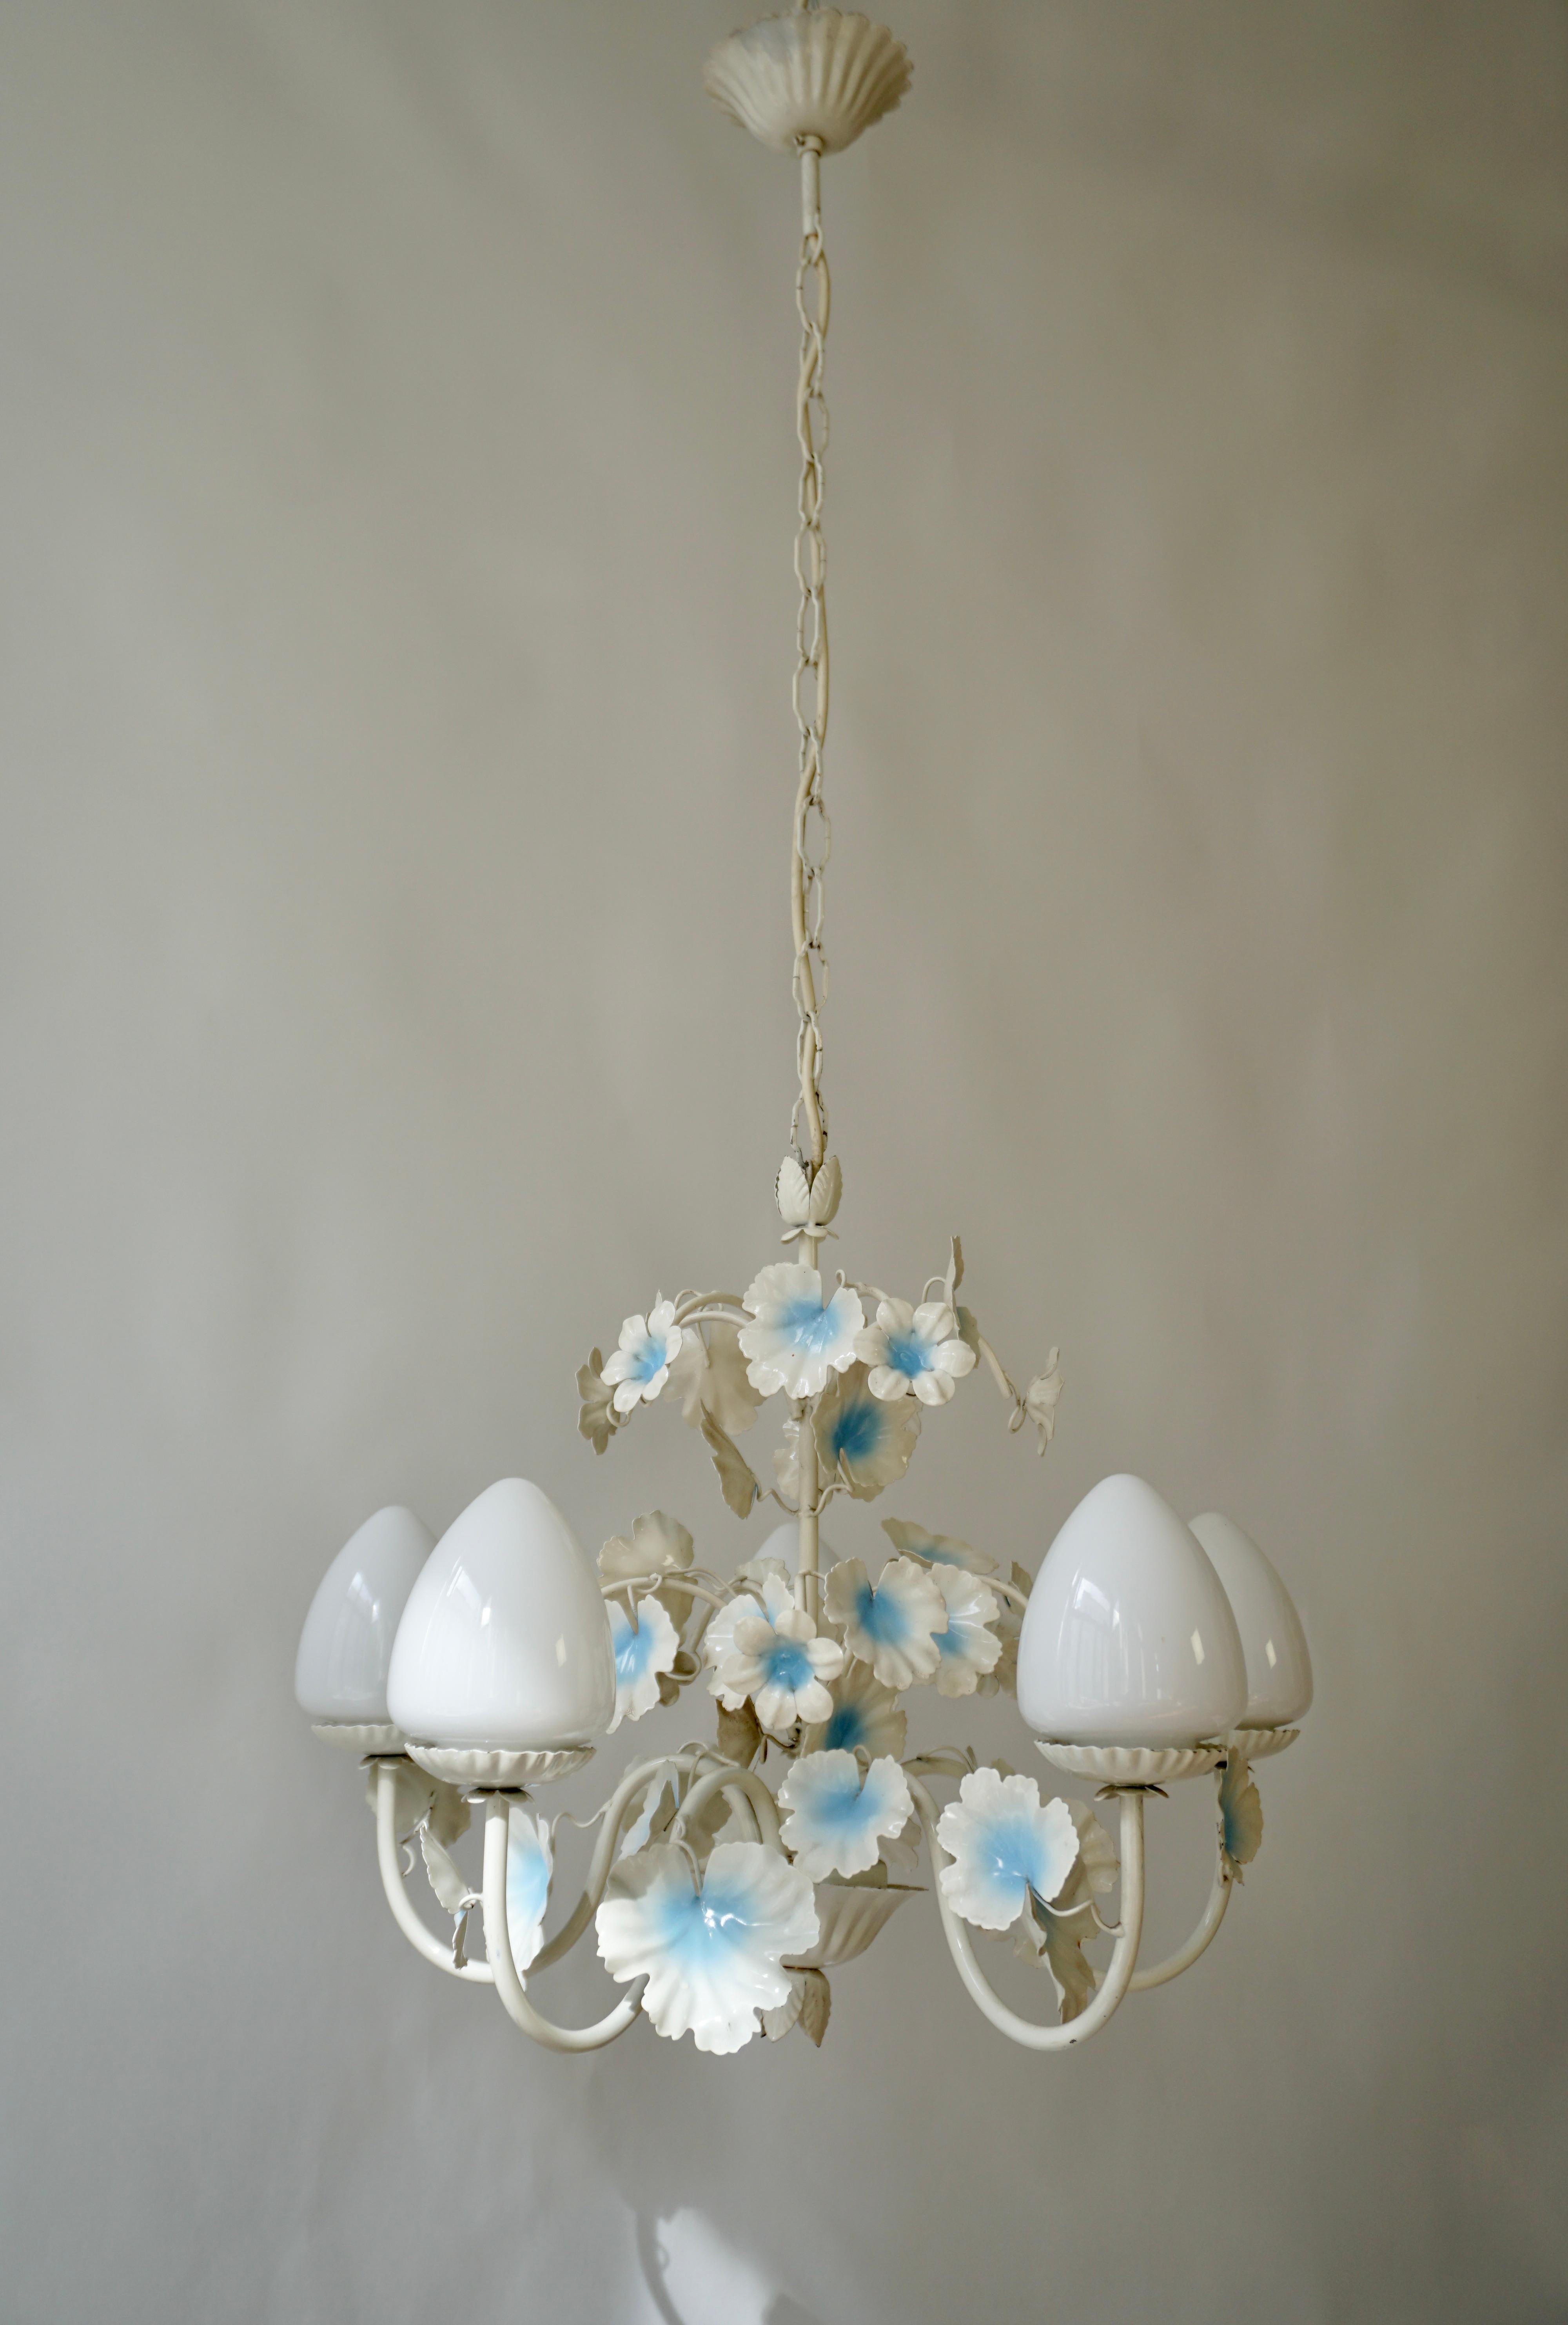 Italian tole chandelier with five opaline glass globes and light blue and white leaves.

The light requires five single E14 screw fit lightbulbs (40Watt max.) LED compatible.

Diameter 52 cm.
Height fixture 45 cm.
Total height 105 cm.
